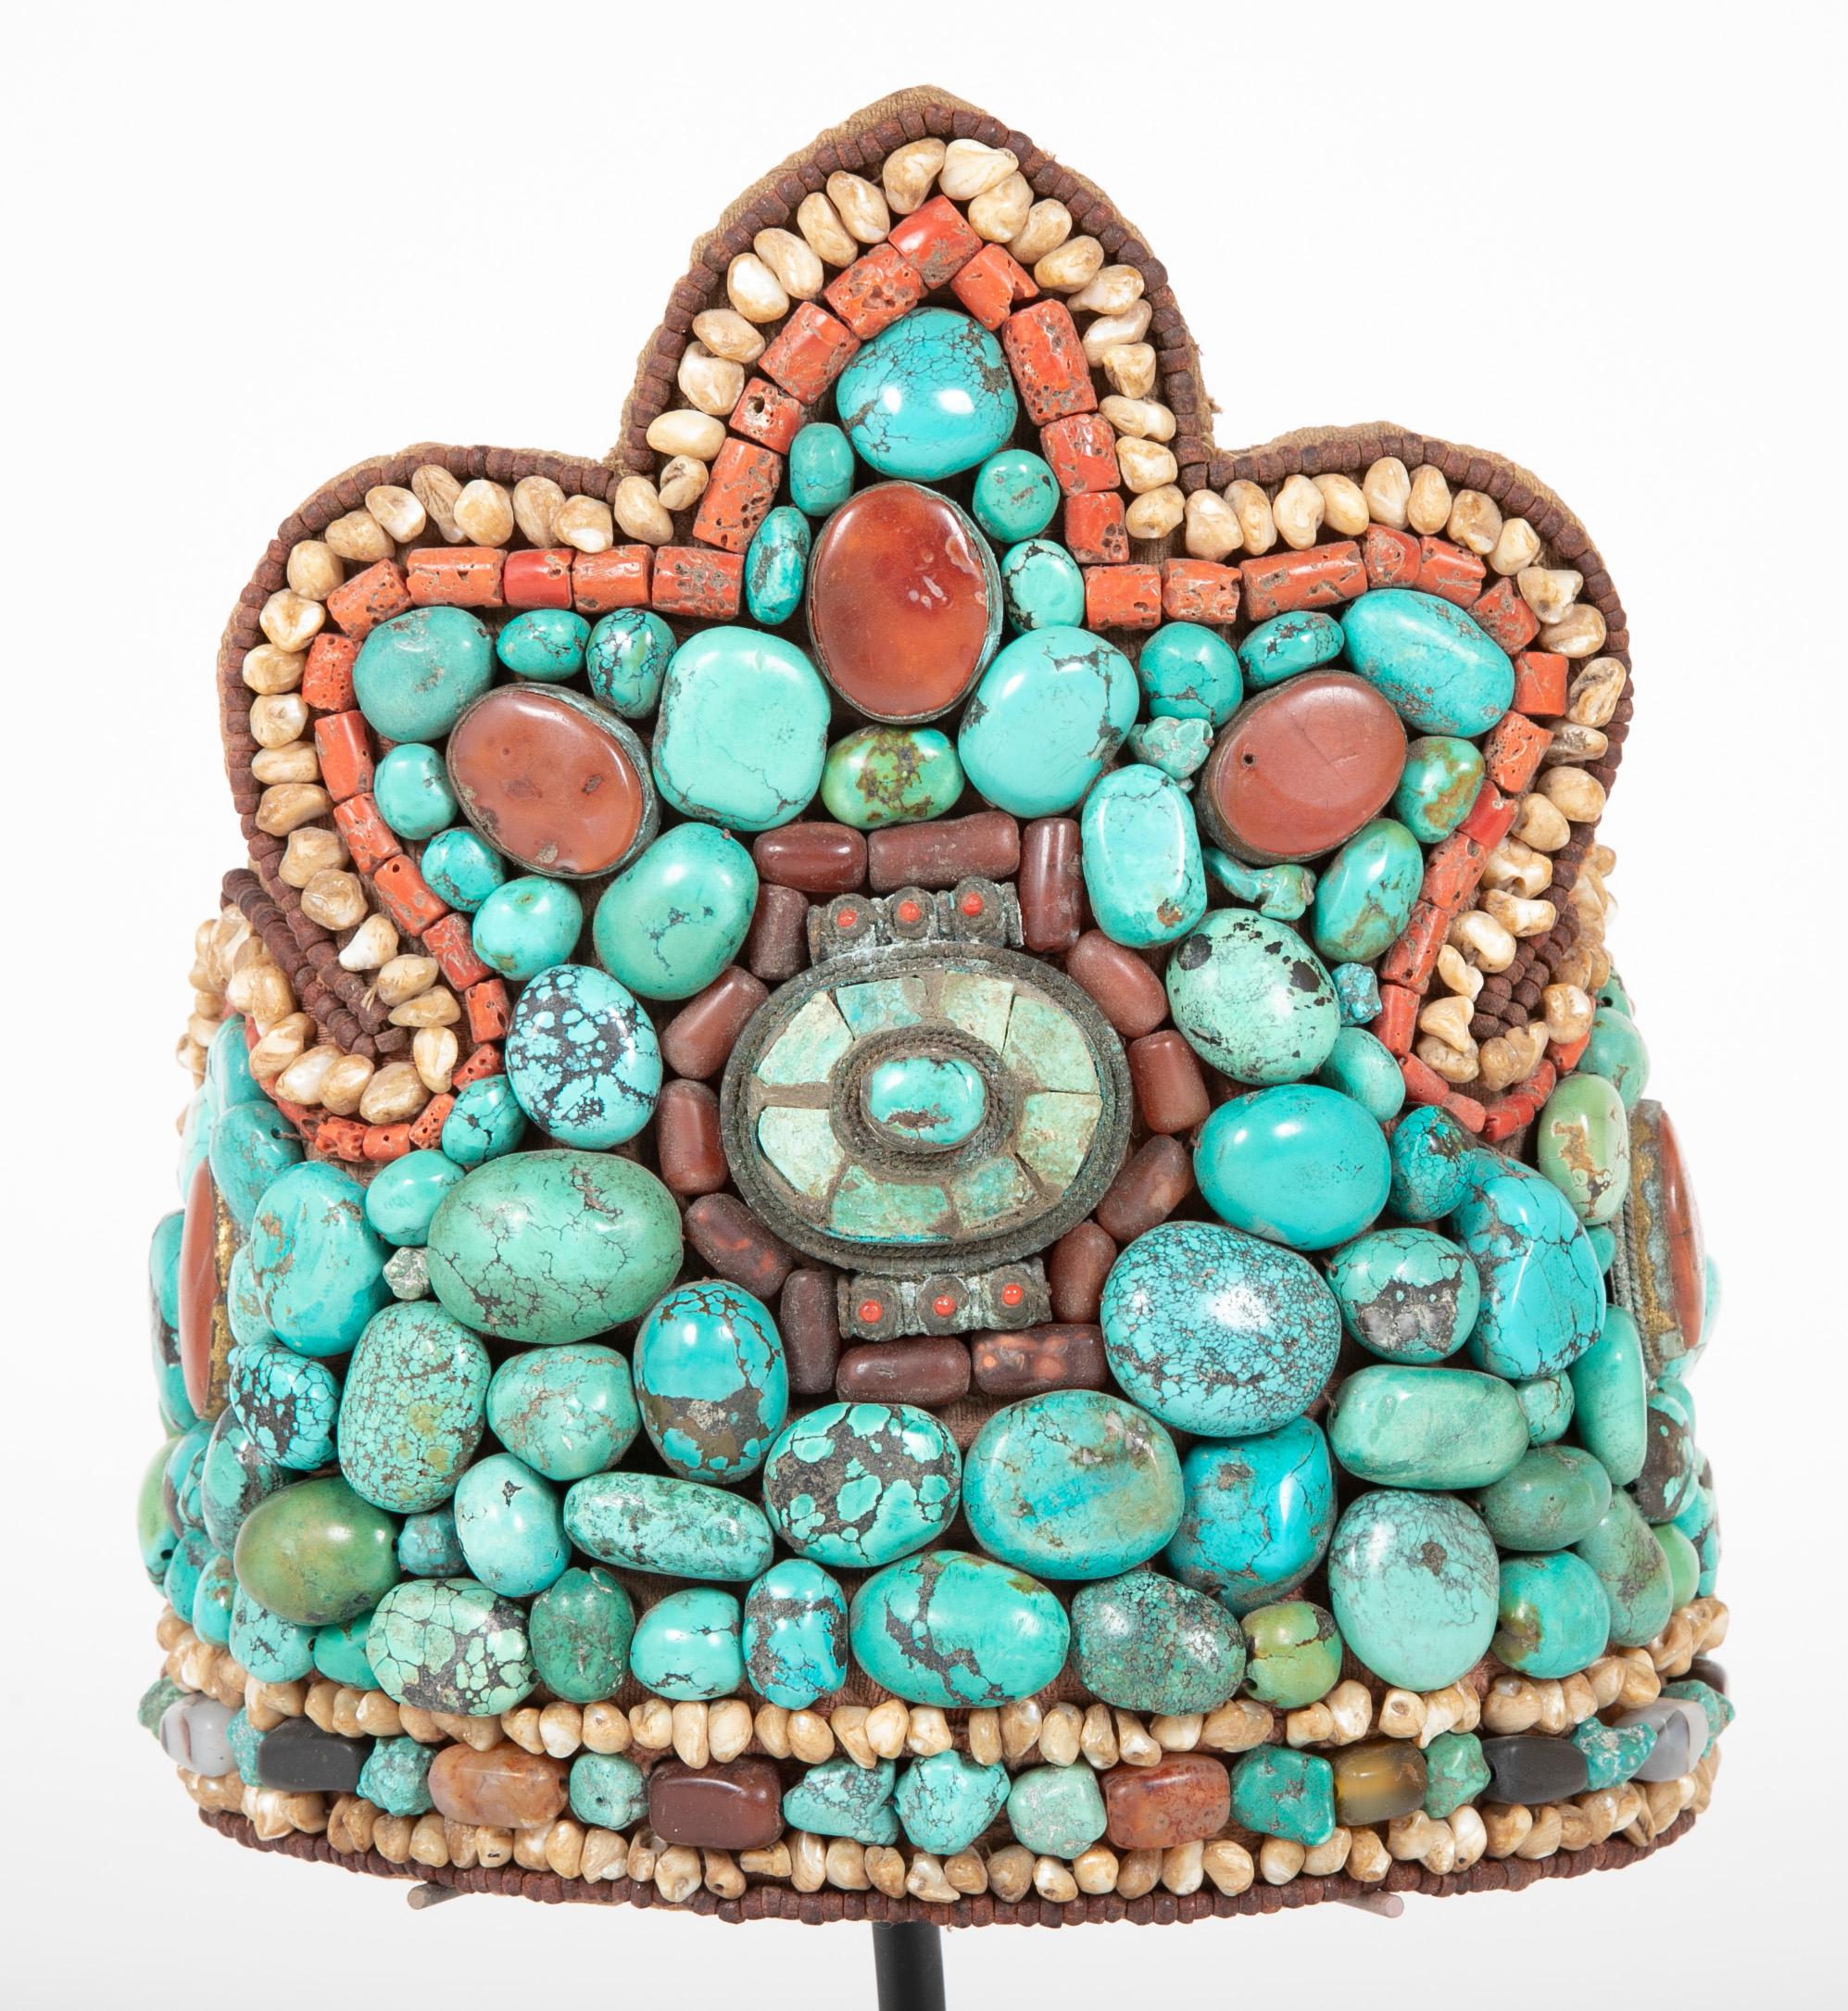 A traditional headdress from Ladakh featuring large beads of turquoise, nacre (mother-of-pearl ), and other semi-precious materials.  Mounted on custom metal stand.